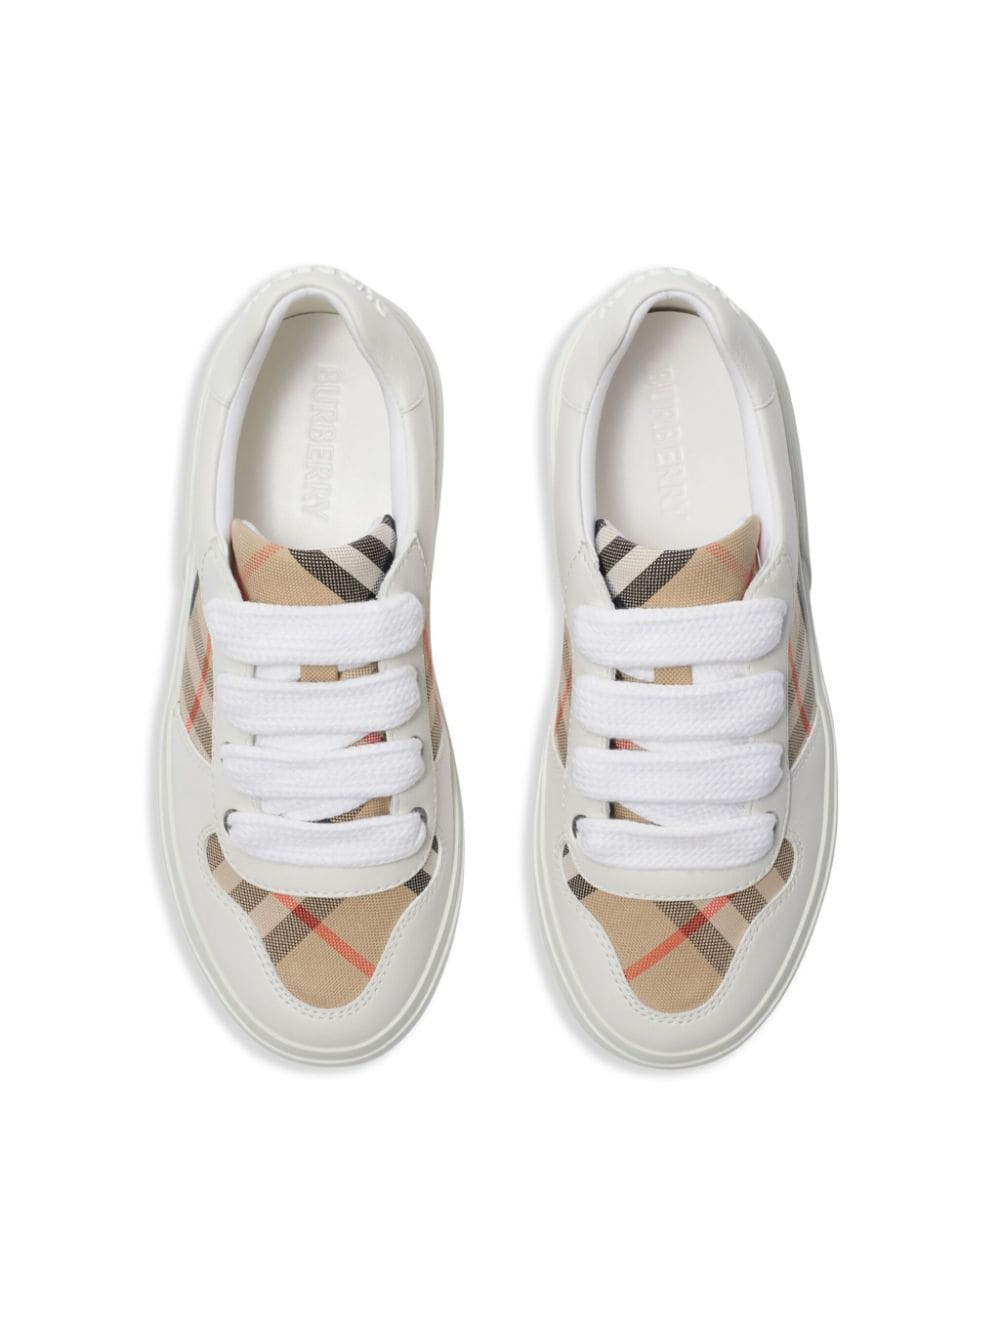 Unisex white leather and cotton sneaker